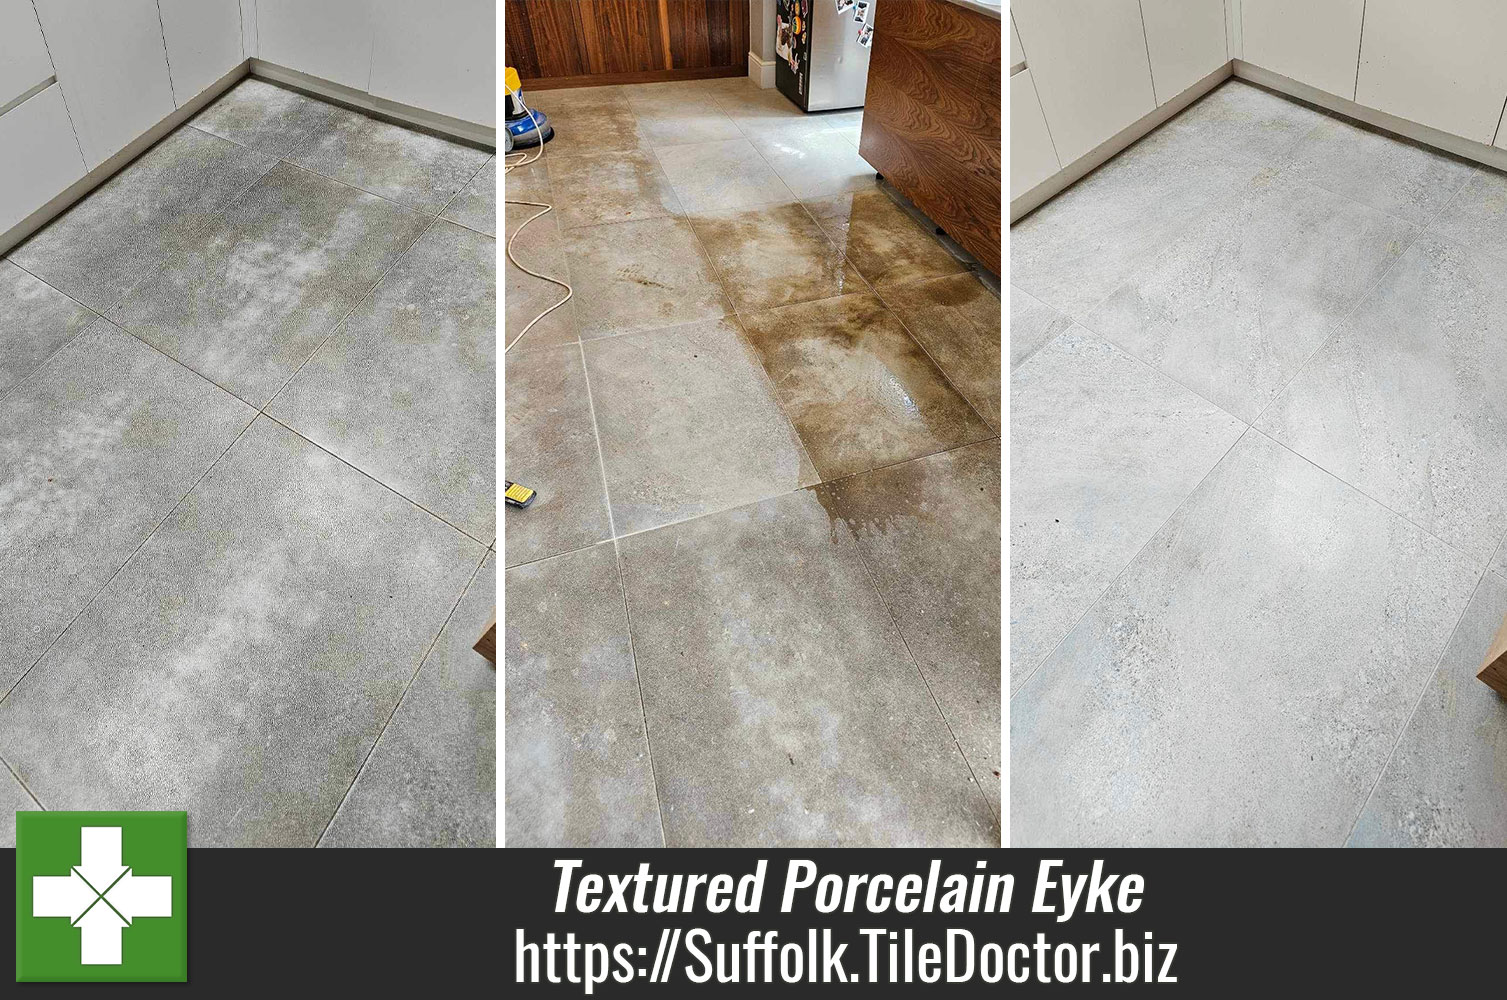 Deep Cleaning Textured Porcelain Tile and Grout with Tile Doctor Pro-Clean in Eyke